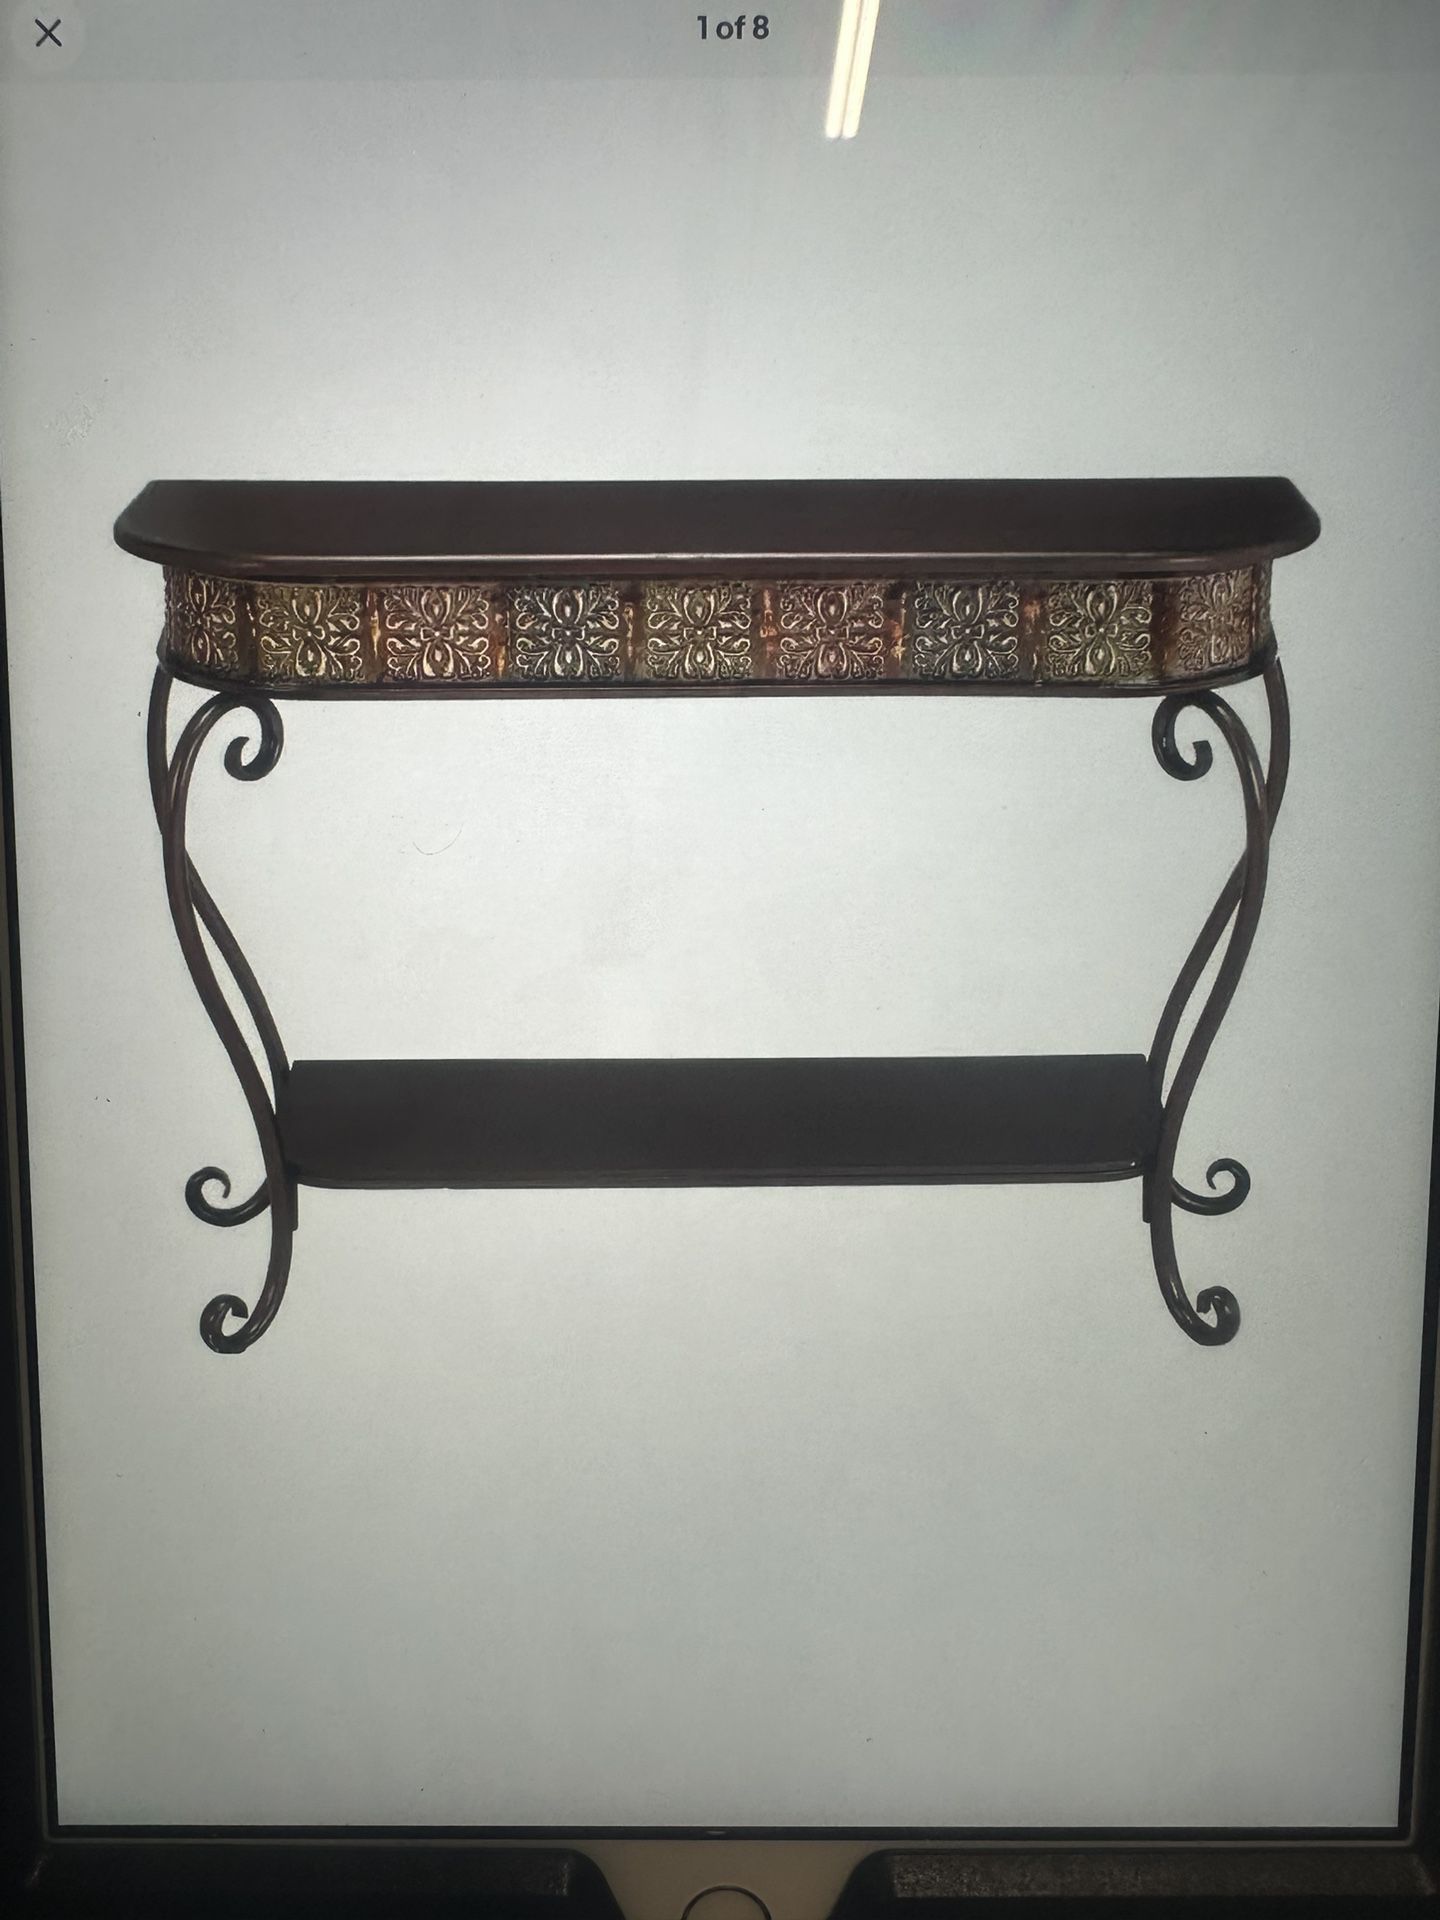 Deco 79 Metal Floral Embossed 1 Shelf Console Table with Ornate Scroll Legs, 43" x 14" x 32", Brown@V9